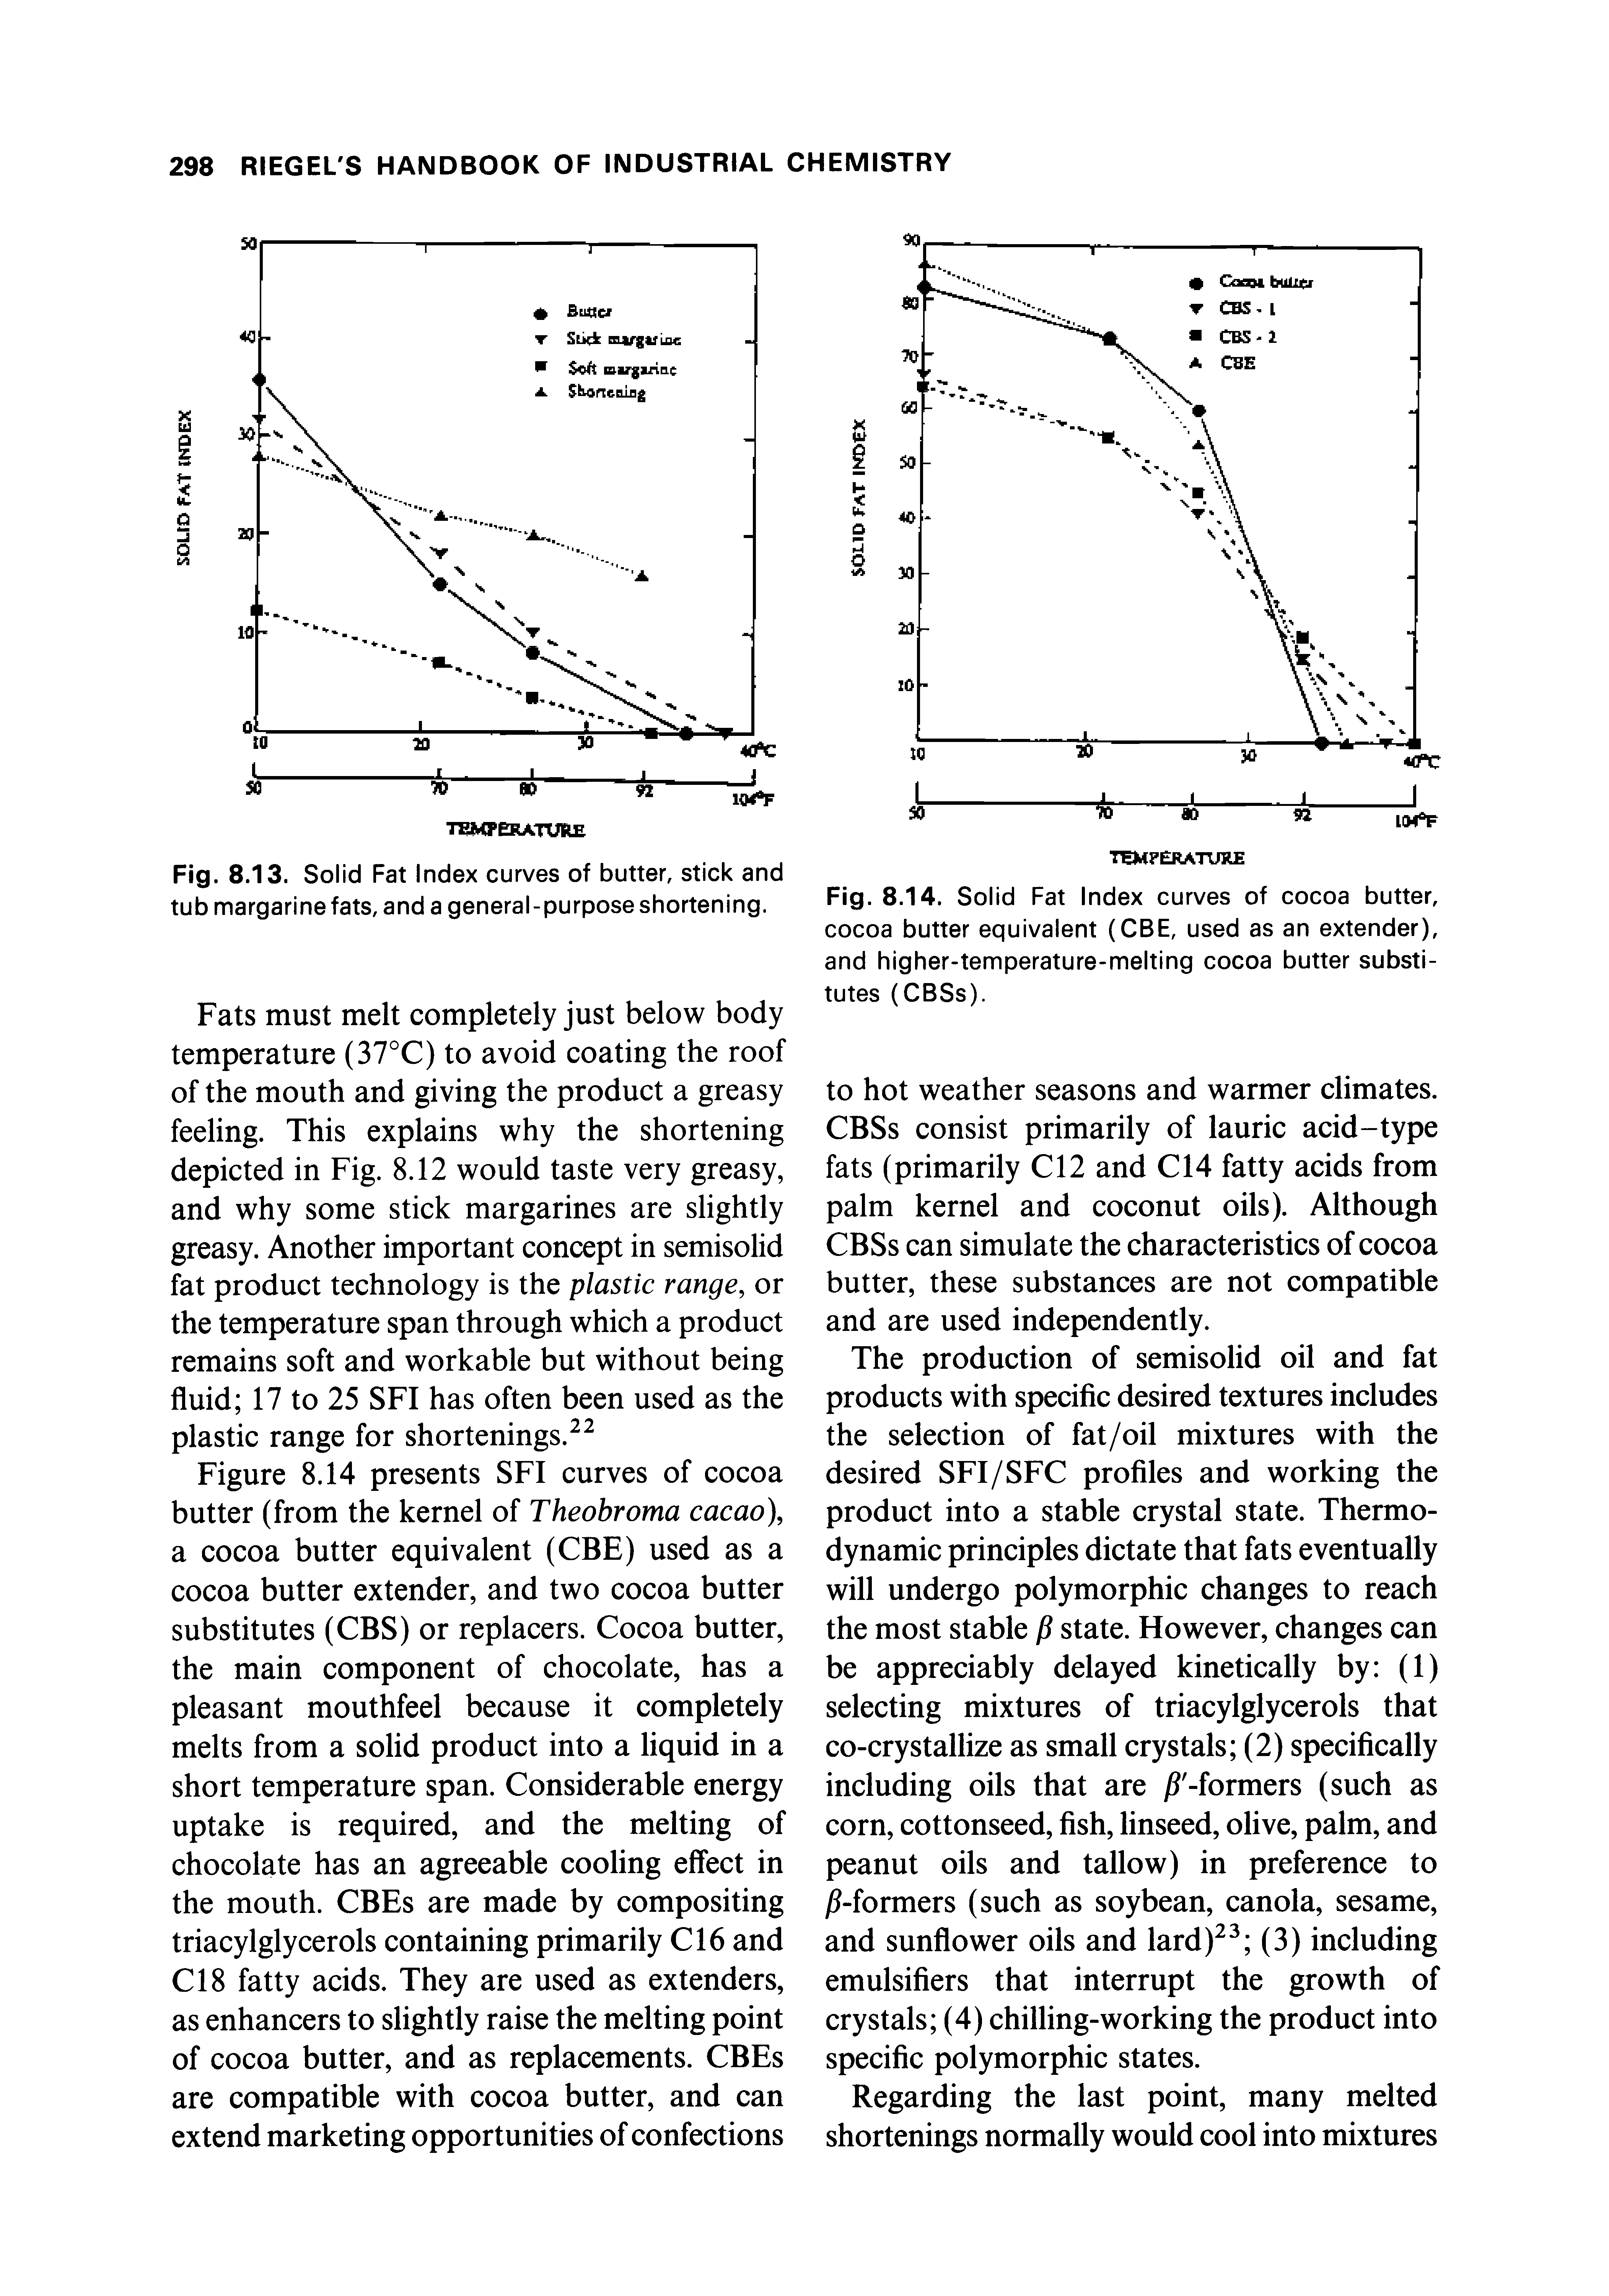 Fig. 8.14. Solid Fat Index curves of cocoa butter, cocoa butter equivalent (CBE, used as an extender), and higher-temperature-melting cocoa butter substitutes (CBSs).